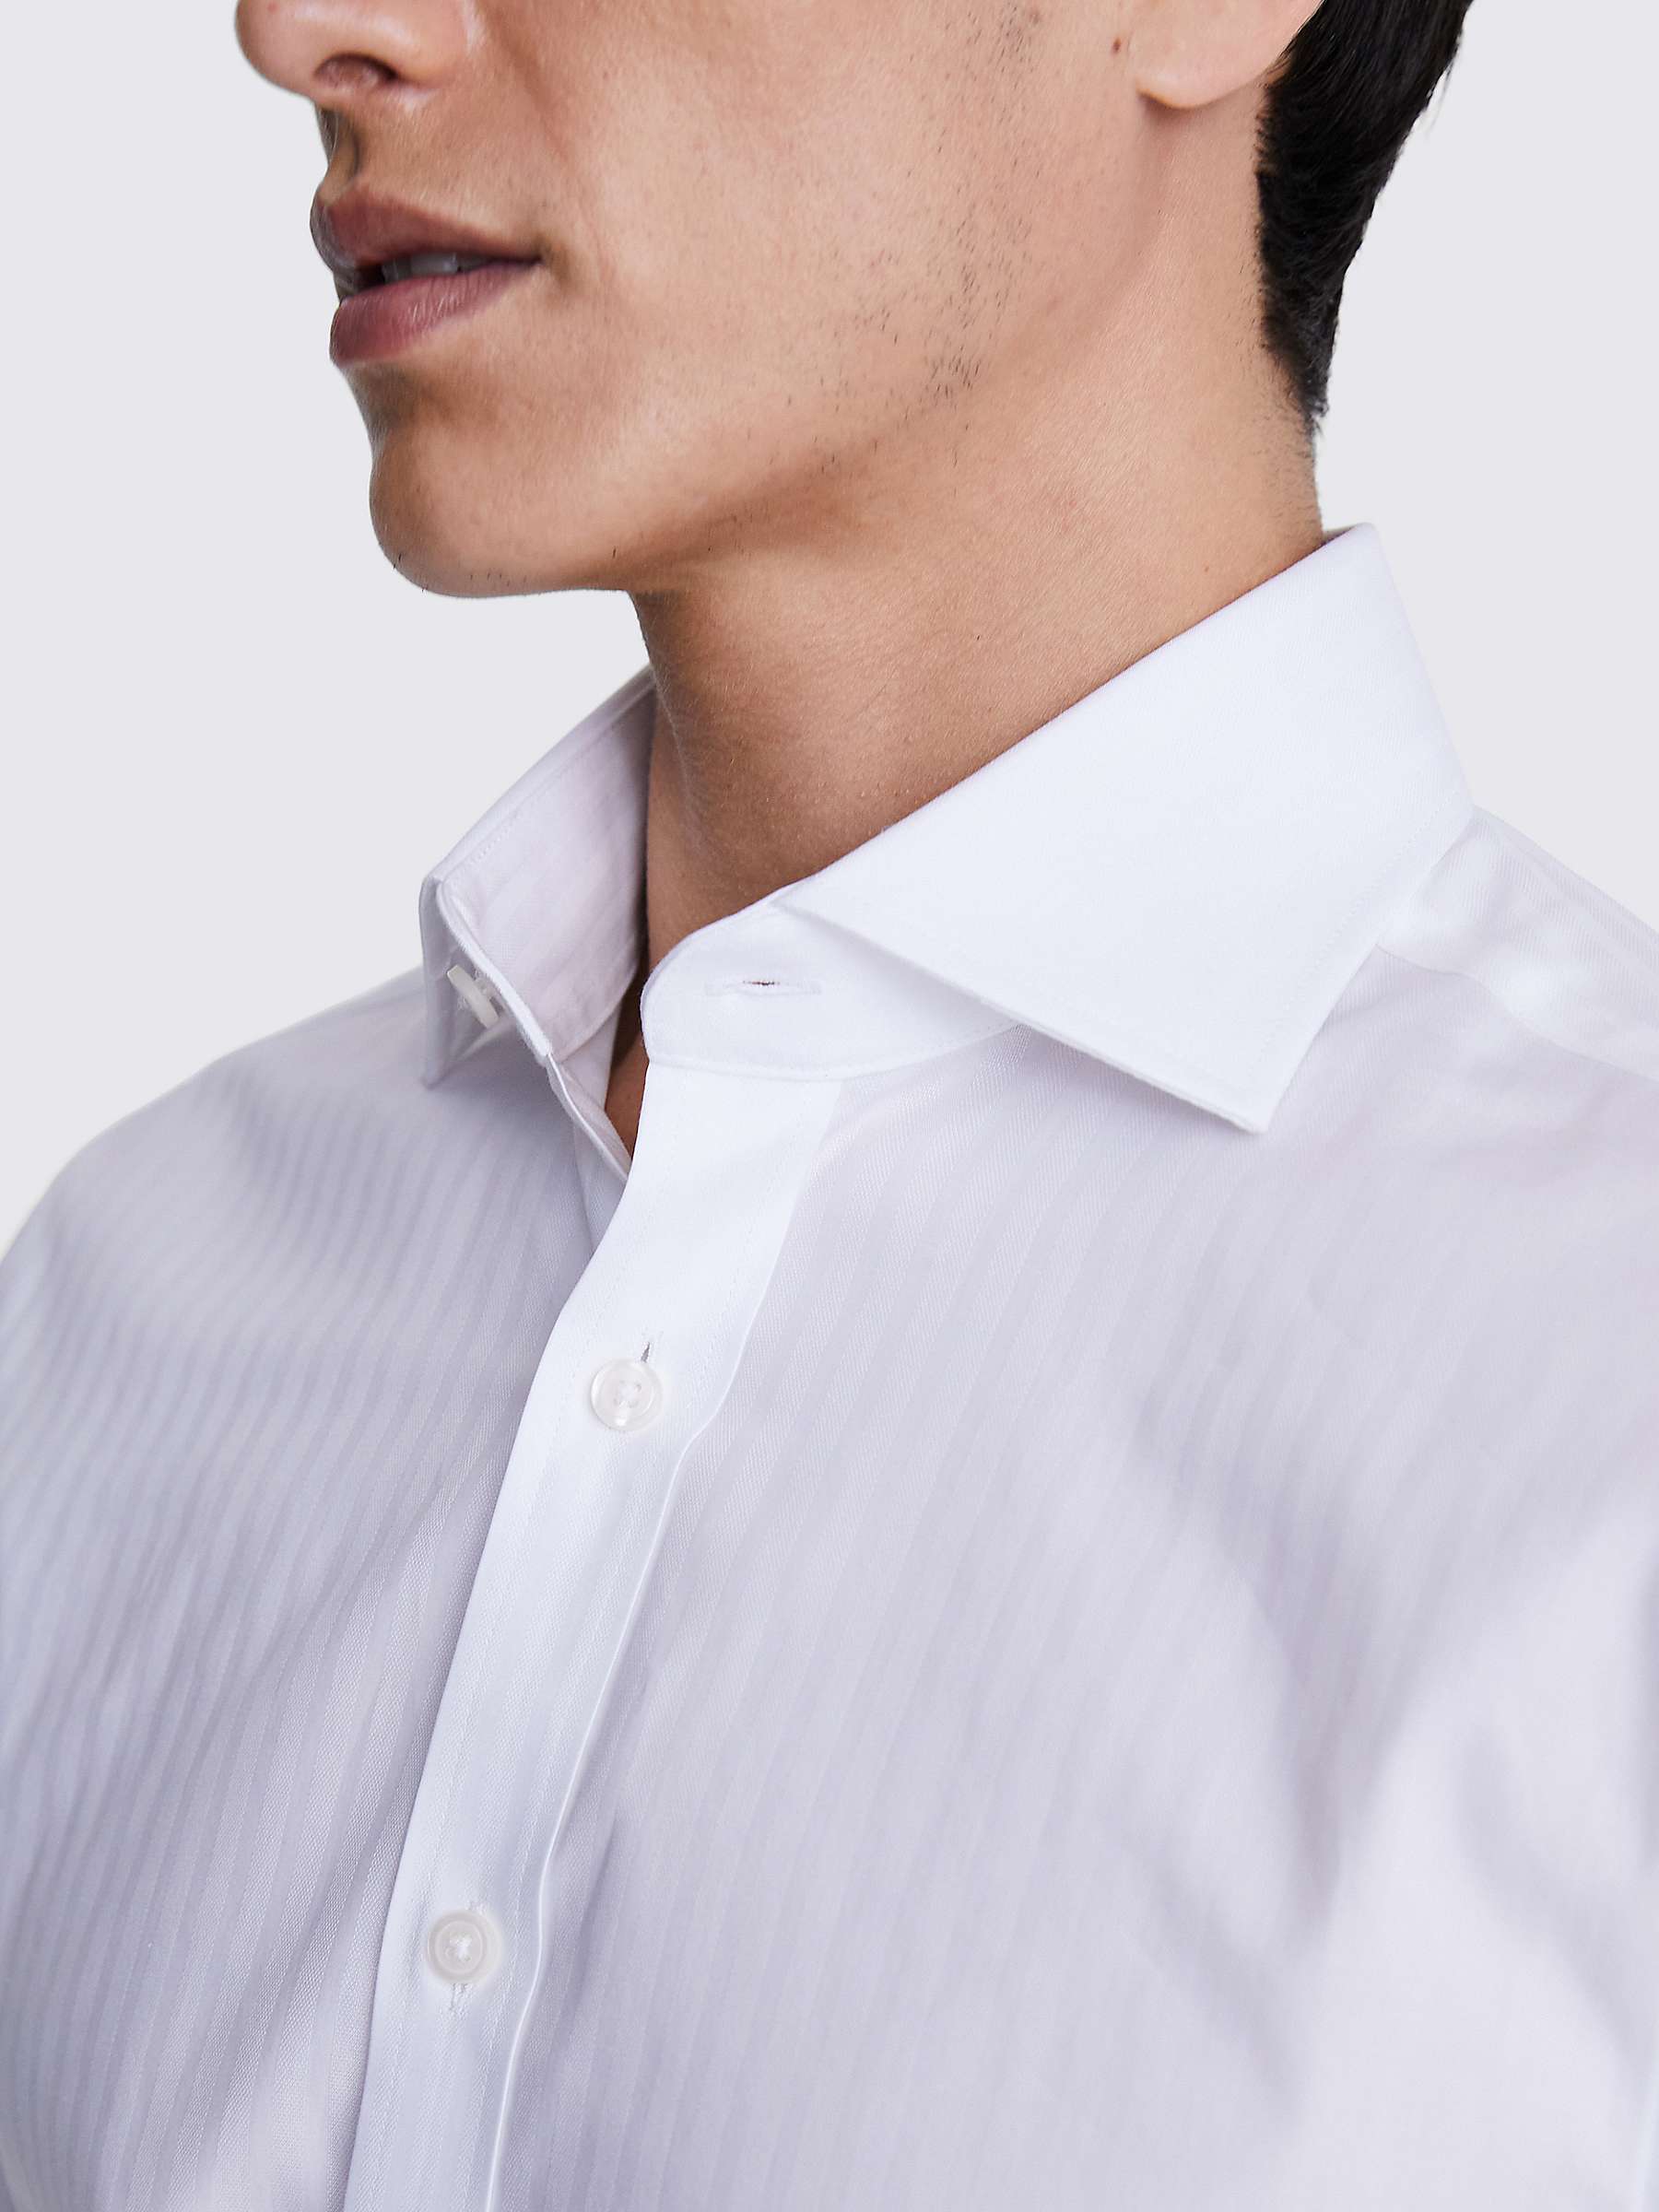 Buy Moss Tailored Fit Self Stripe Shirt, White Online at johnlewis.com